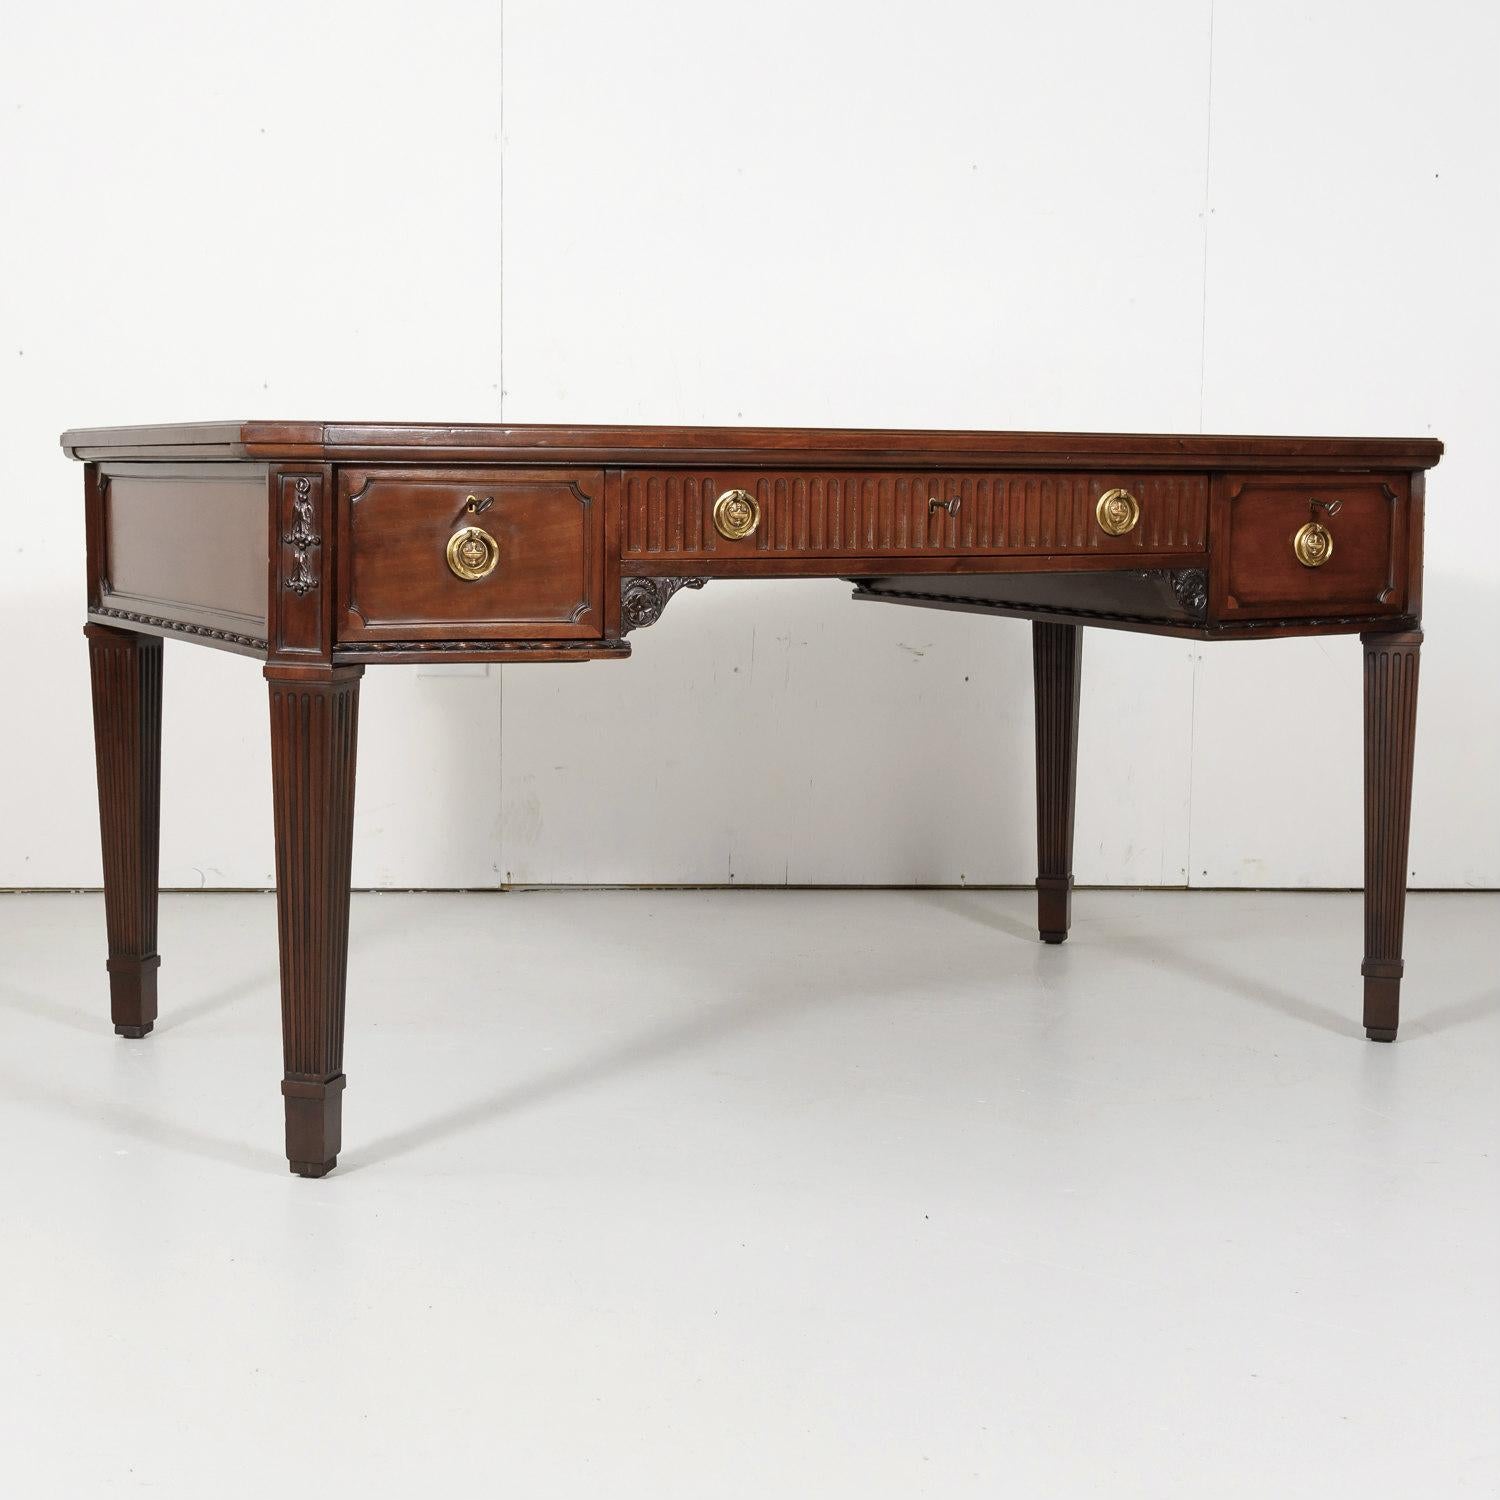 Mid-19th Century 19th Century French Louis XVI Style Walnut Bureau Plat or Desk with Leather Top